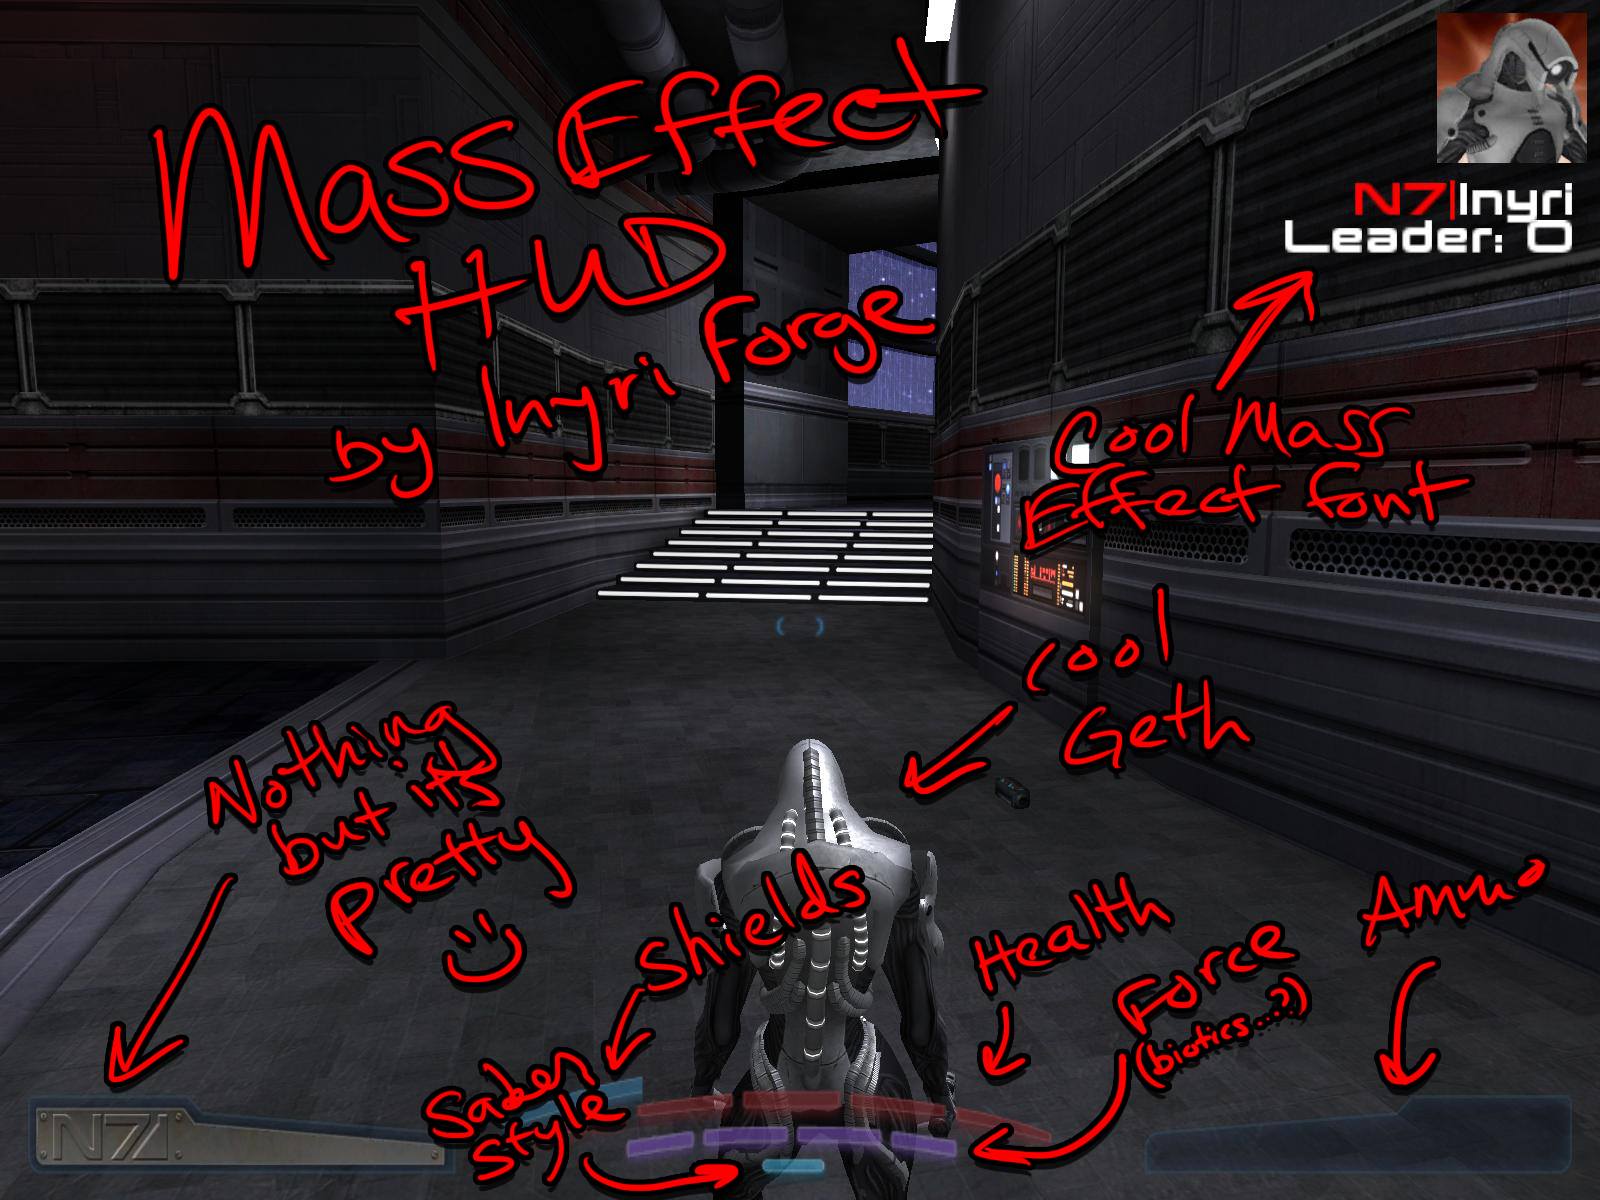 More information about "Mass Effect 3 HUD"